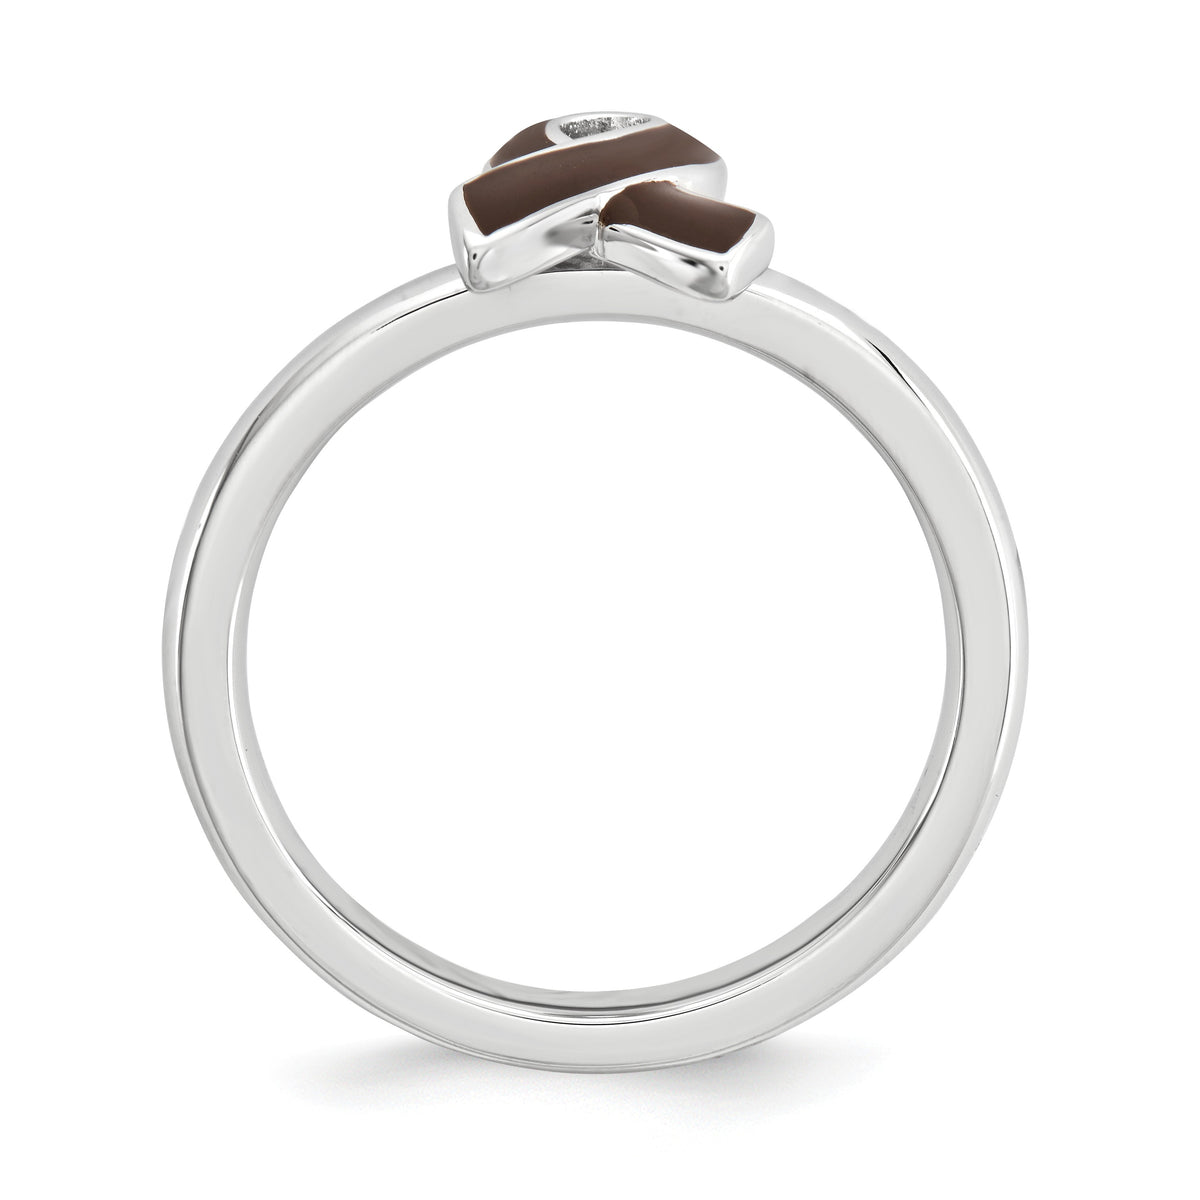 Alternate view of the Silver Stackable Brown Enamel Awareness Ribbon Ring by The Black Bow Jewelry Co.